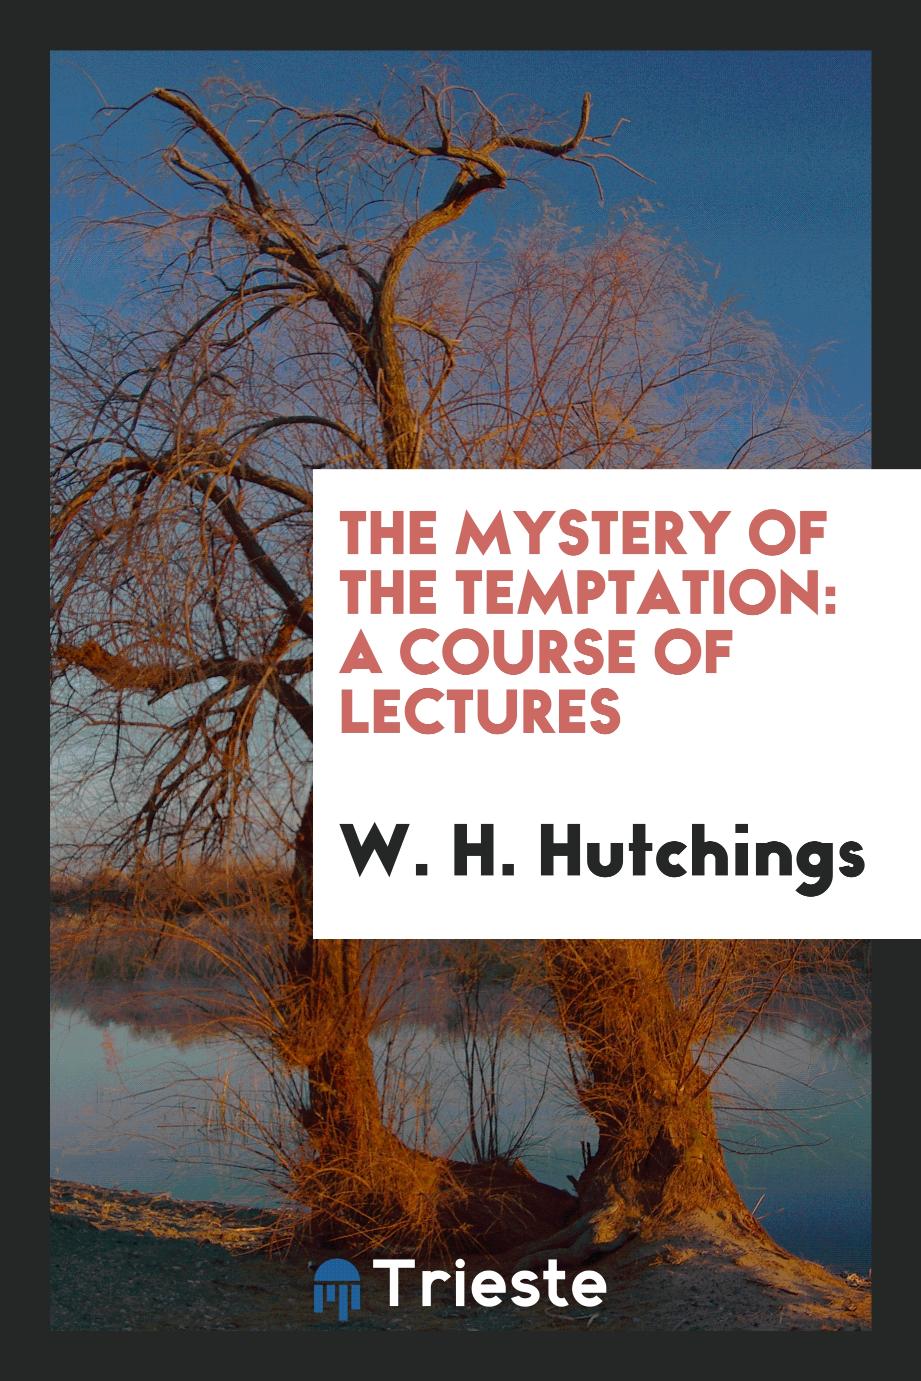 The mystery of the temptation: a course of lectures